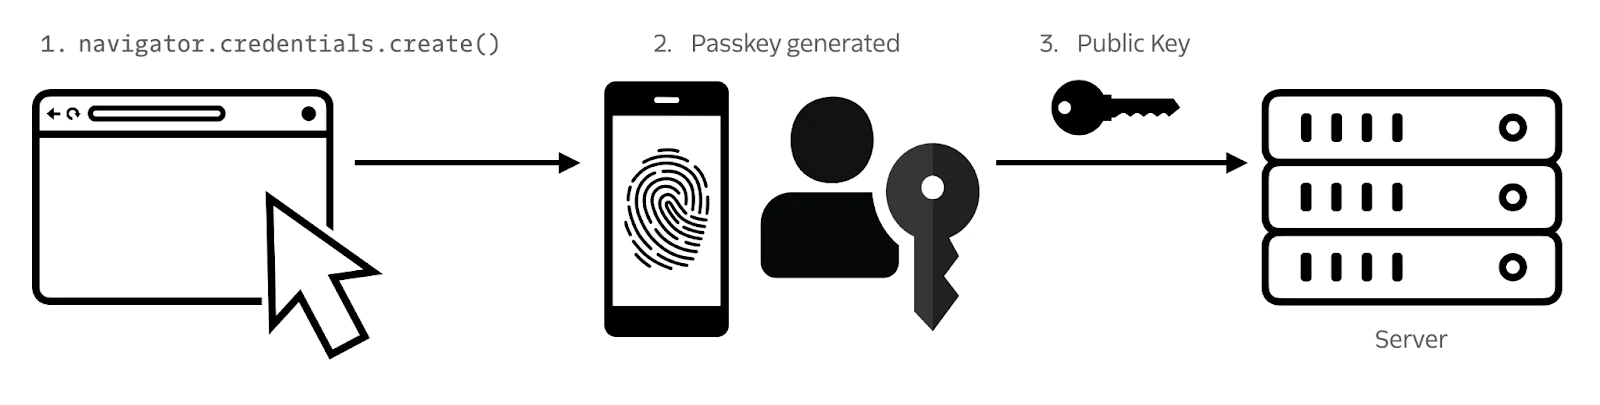 Simplified diagram of the passkey registration process.